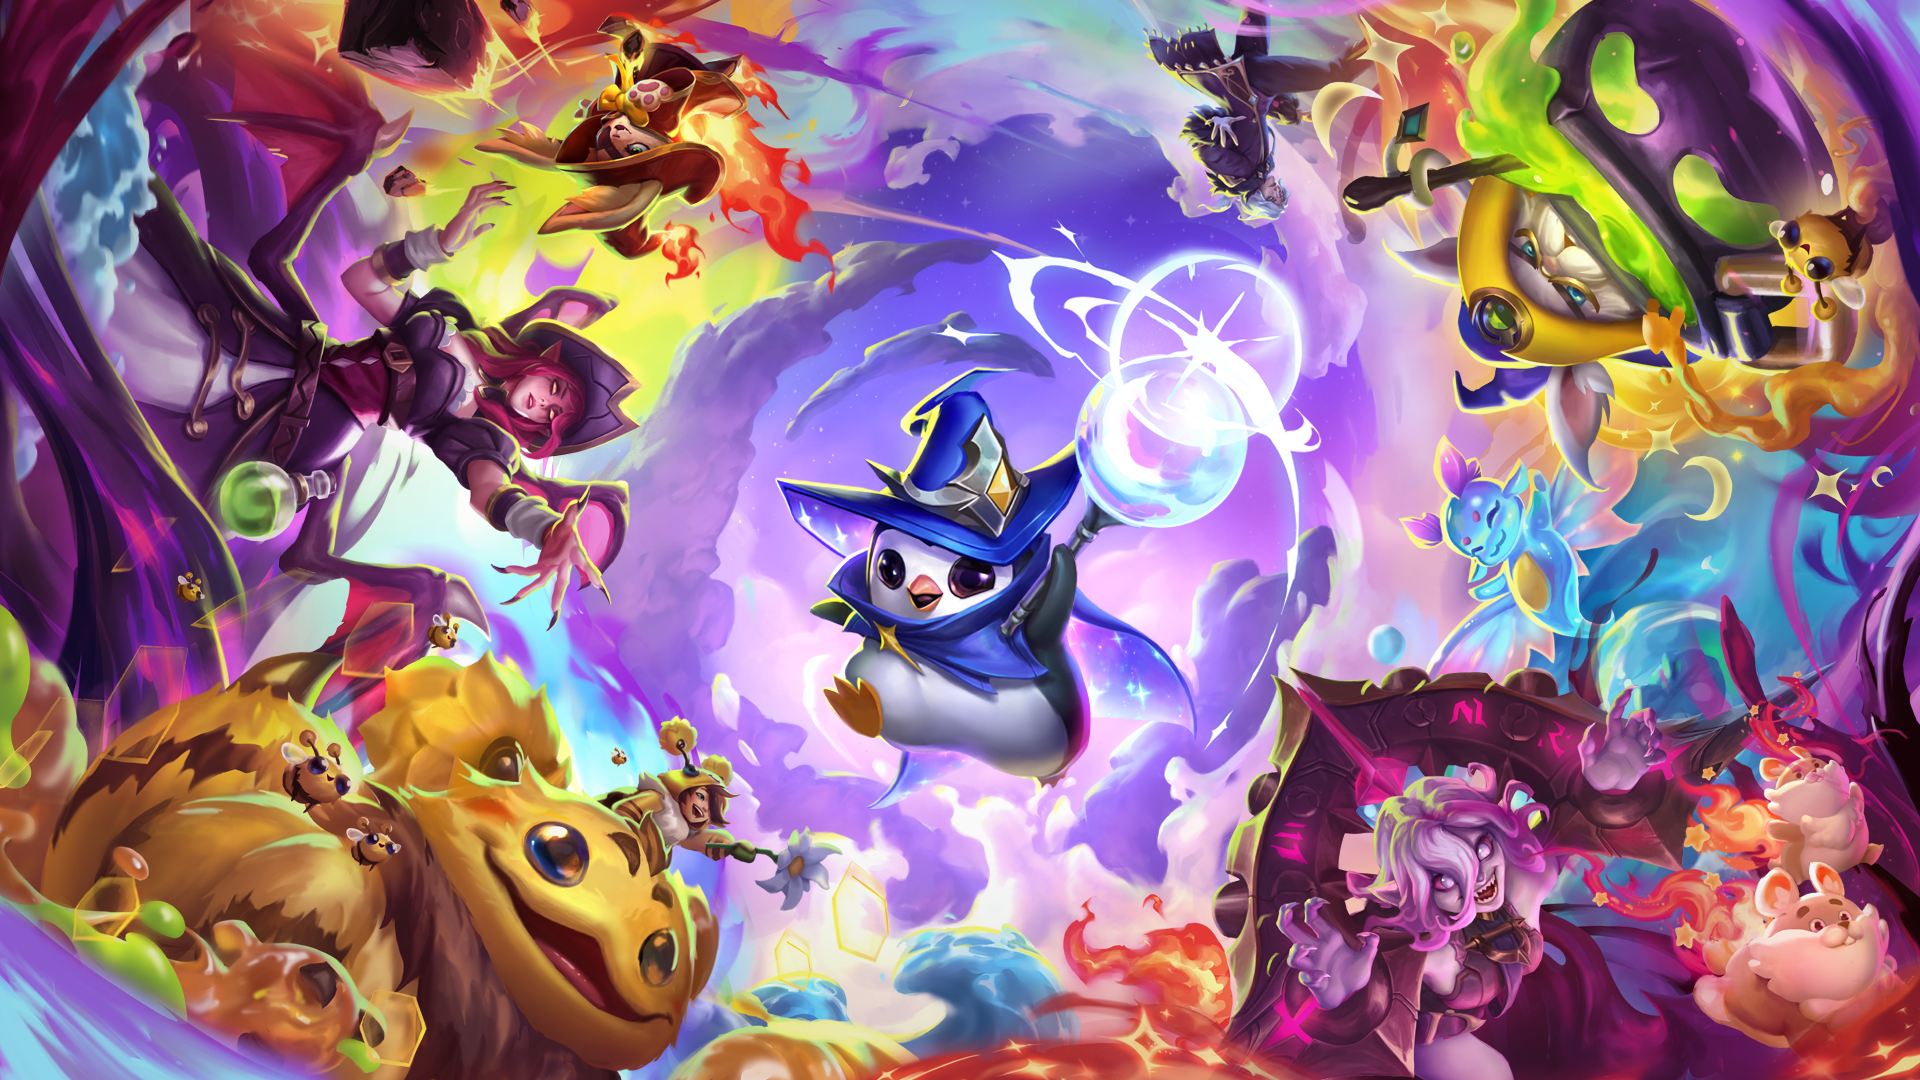 Key art for the Magic n’ Mayhem set from Teamfight Tactics, showing an array of magical champions from the League of Legends roster swirled around in a colorful collage. In the middle, the penguin knight Pengu is decked out in a wizard outfit, casting a spell of his own.